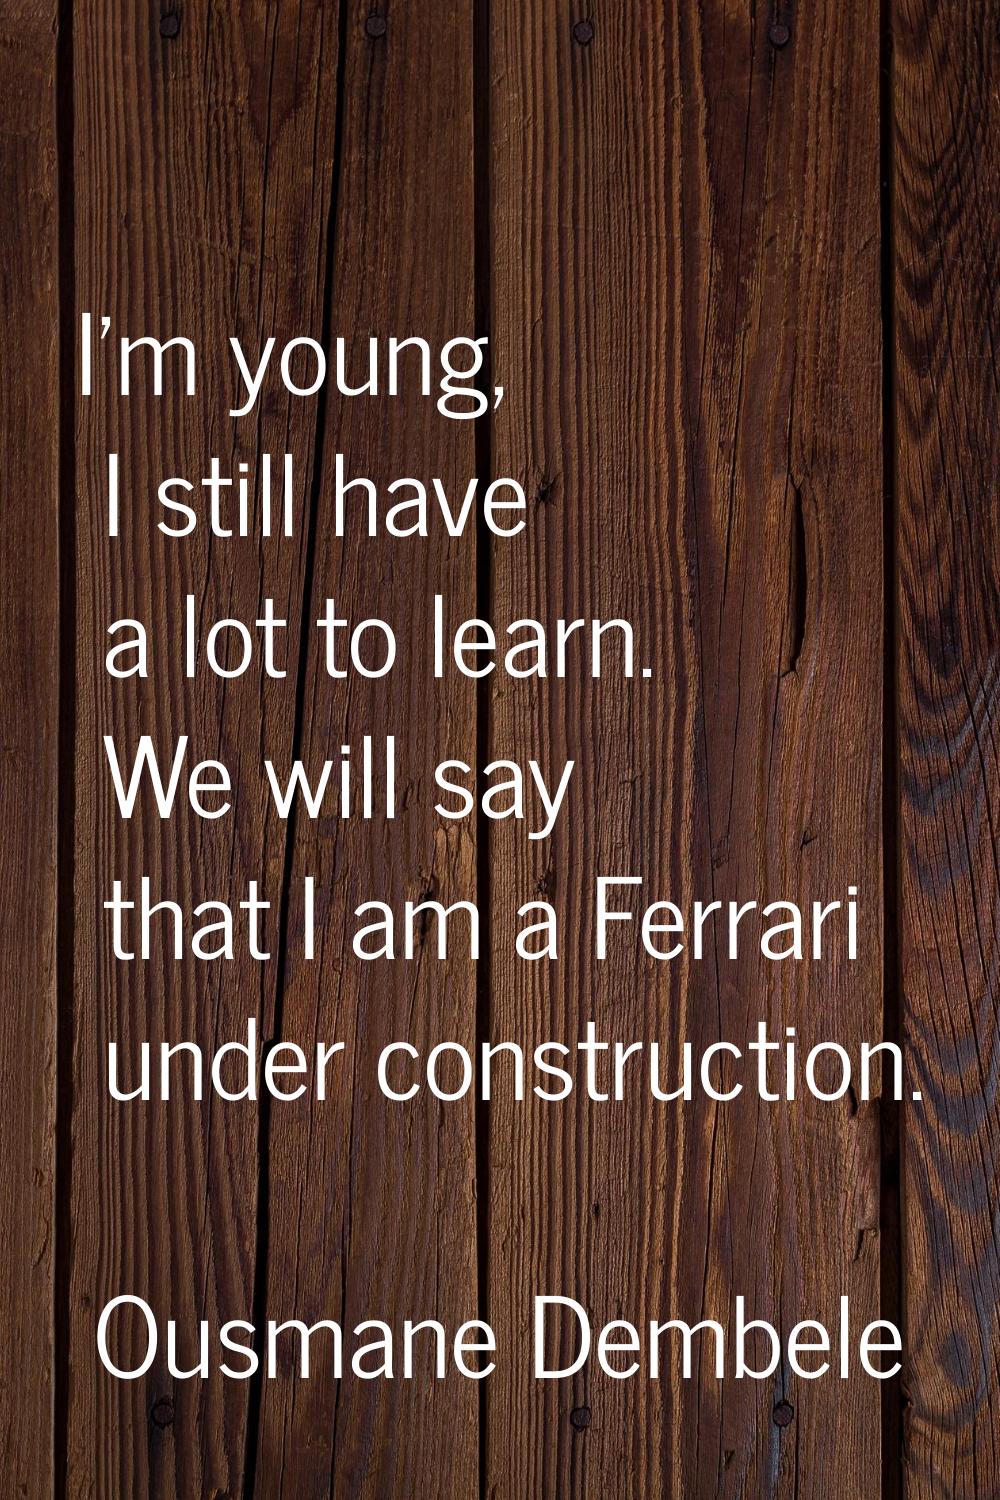 I'm young, I still have a lot to learn. We will say that I am a Ferrari under construction.